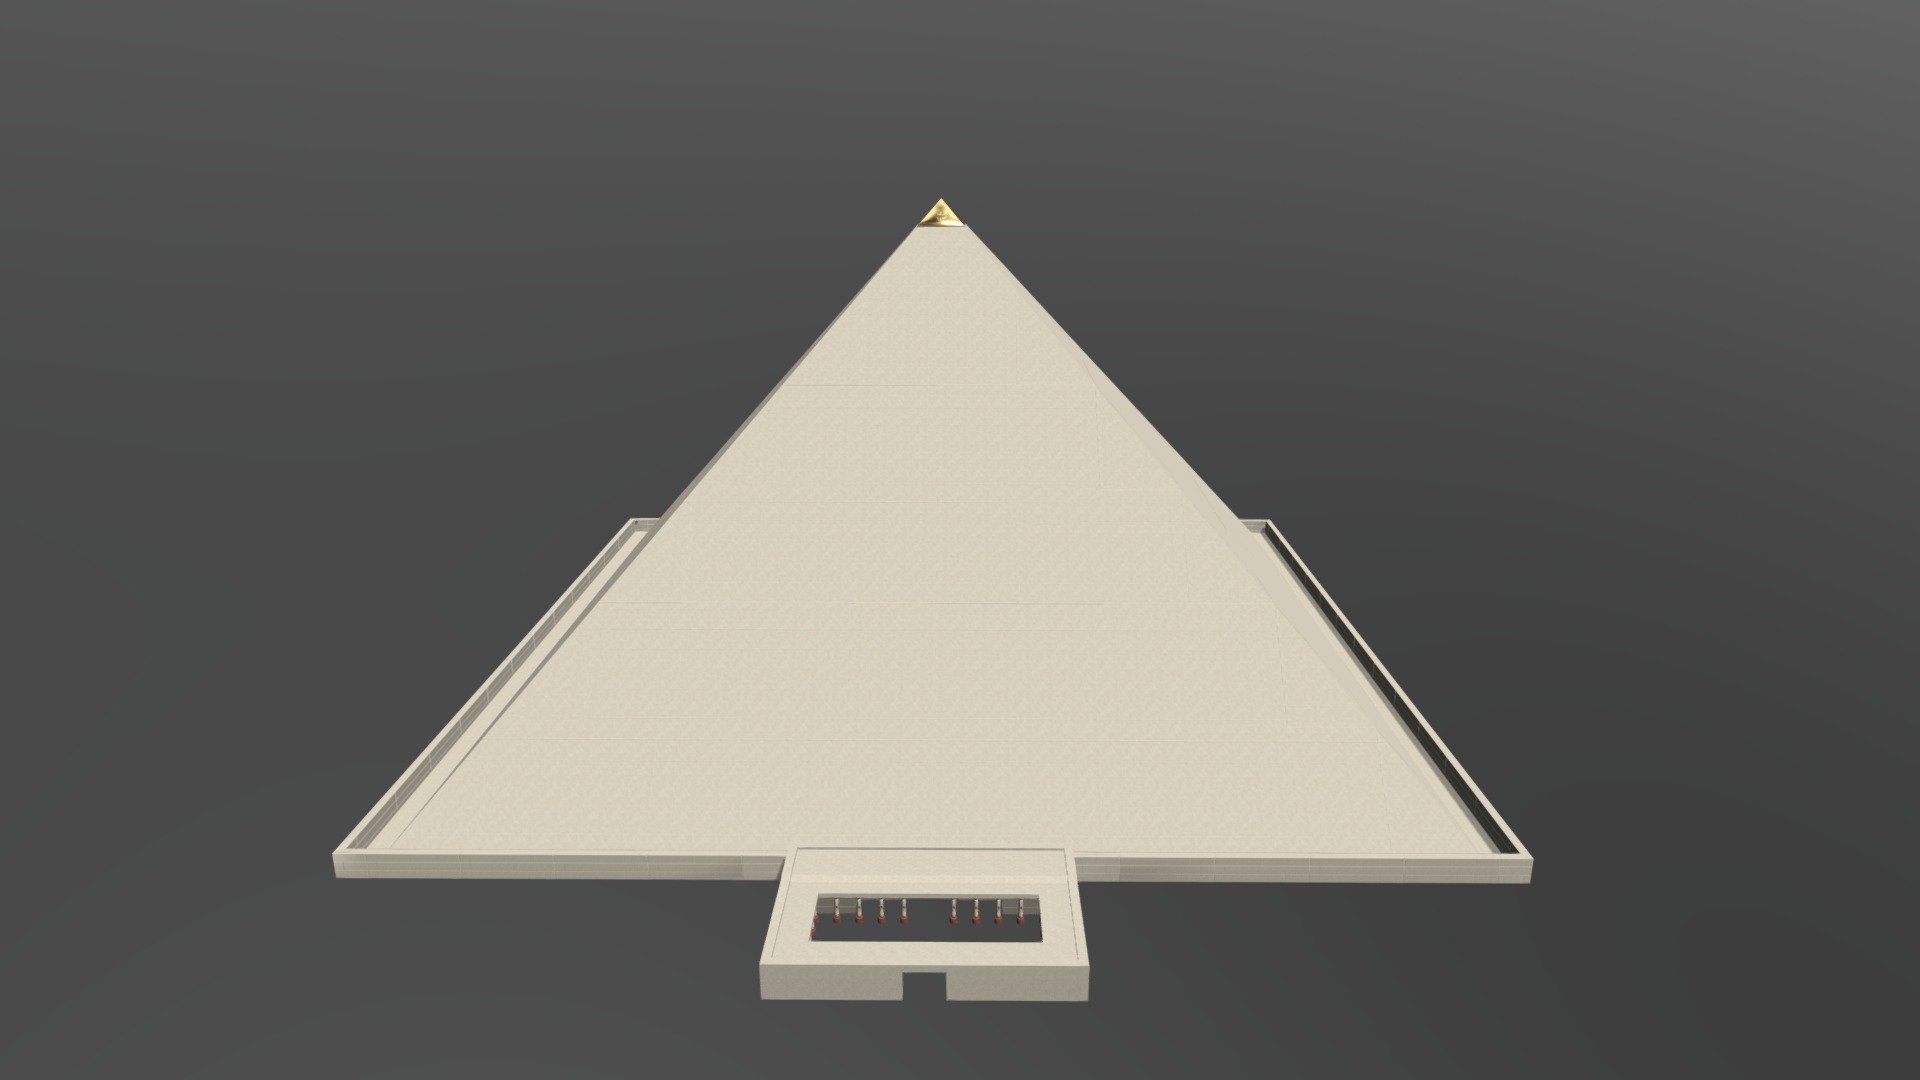 Pyramid of Cheops

file format


3ds max 2017
obj (multi Format)
FBX (multi Format)
included RAR archive with textures and *.obj file for the Unity and Vray

Total number of polygons in the scene: Tris: 9370 Vertices: 5305

I will be happy if you like it 3d model! See my other 3d models, just click on my user name 3d model